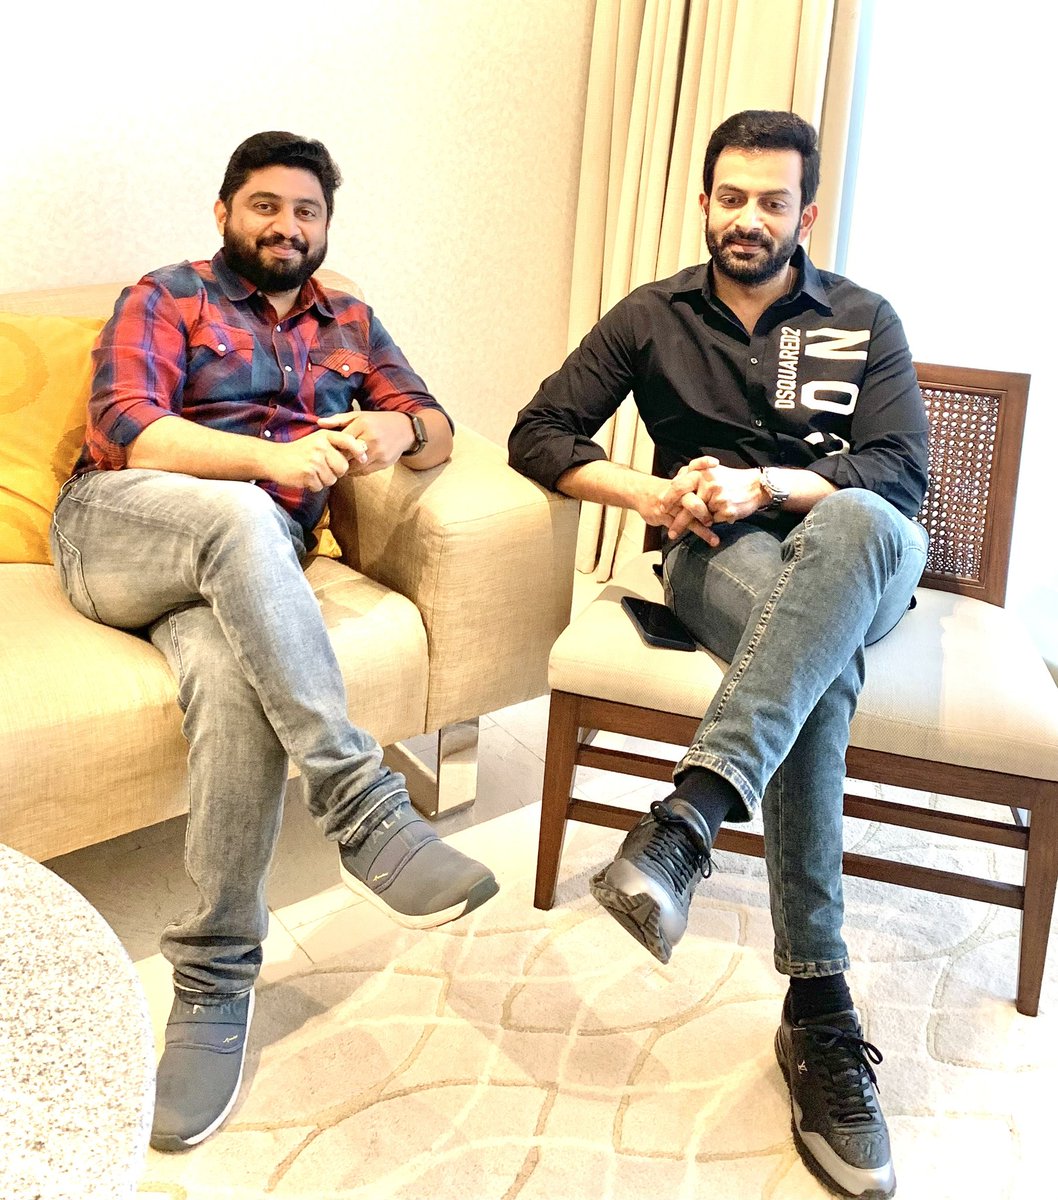 Happy Birthday Superstar! 🌟🤗🎉🎂🎈@PrithviOfficial You're not just a mentor and idol, but also a dear friend and an inspiration to all. Here's to another year of greatness and success. 🎉 #HappyBirthdayPrithvi #HappyBirthdayPrithvirajSukumaran #HBDPrithvirajSukumaran